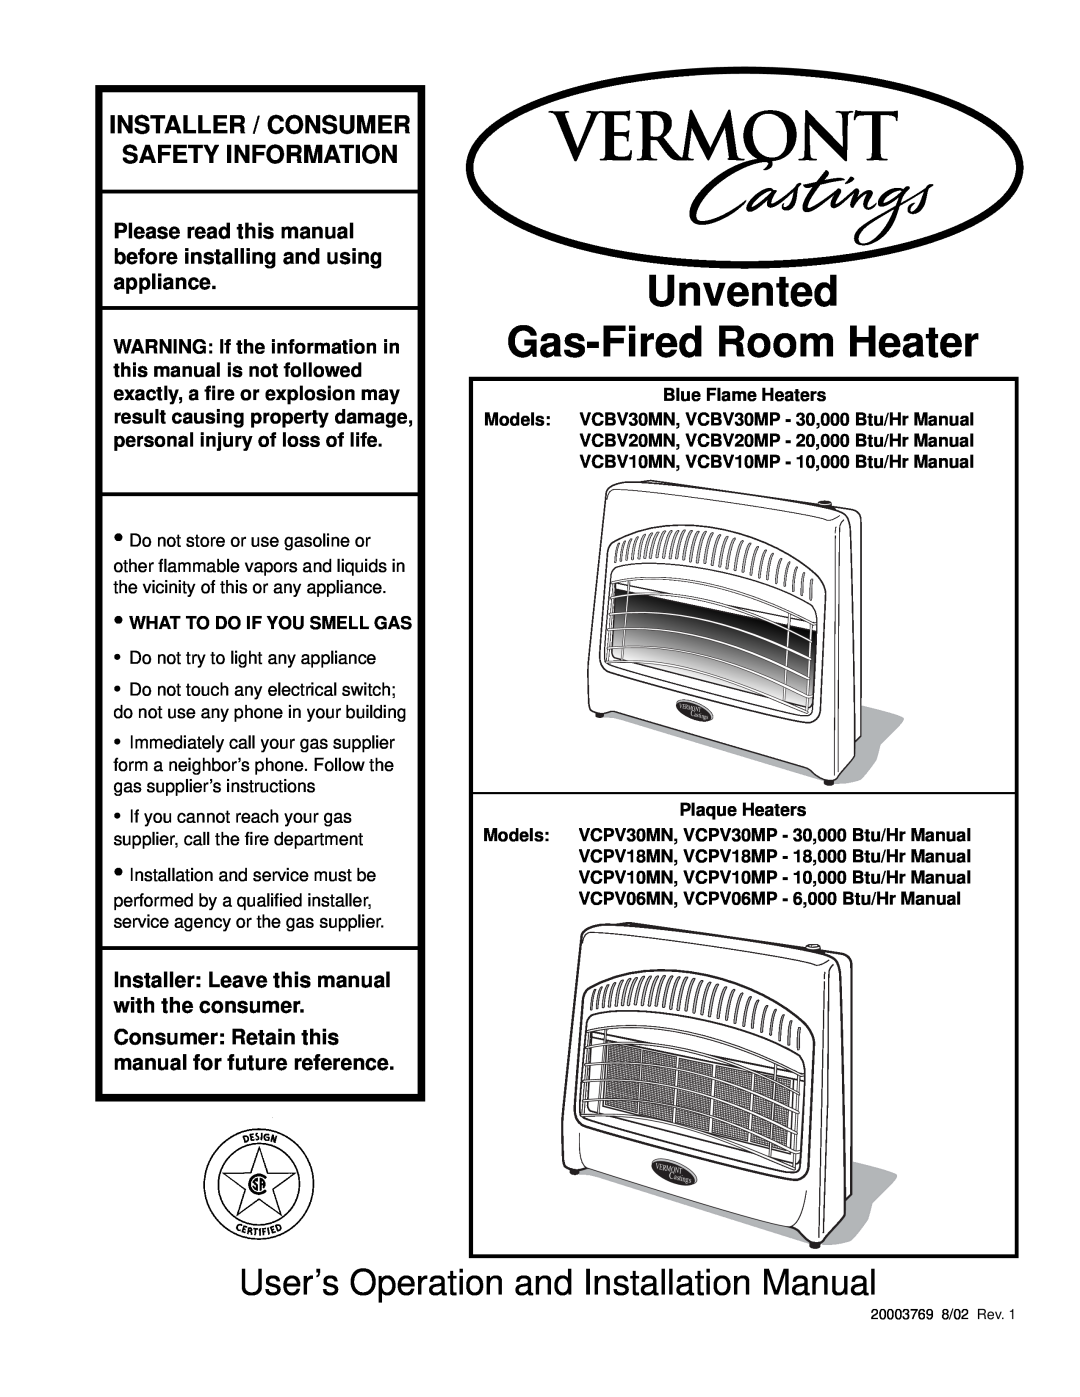 Vermont Casting VCPV18 installation manual Installer Leave this manual with the consumer, Unvented Gas-FiredRoom Heater 